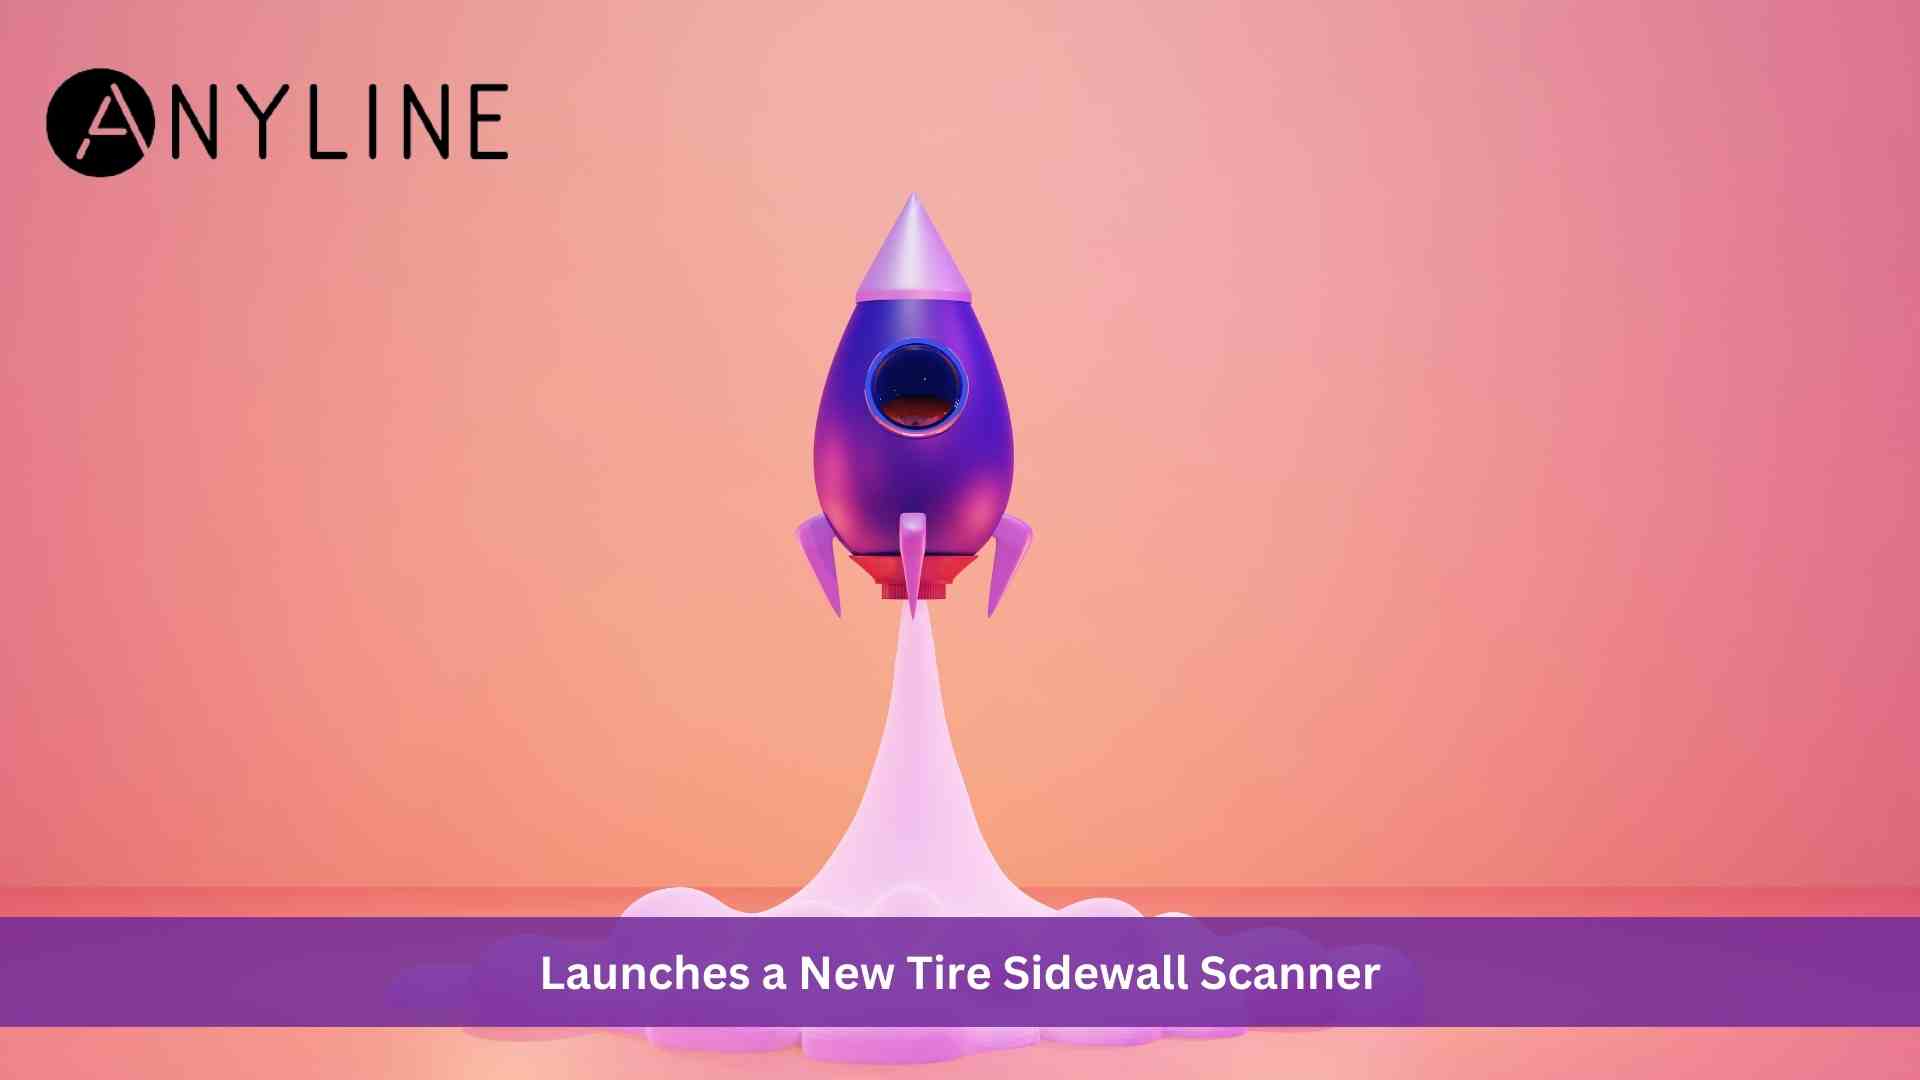 Anyline Launches a New Tire Sidewall Scanner for E-Commerce To Boost Online Sales